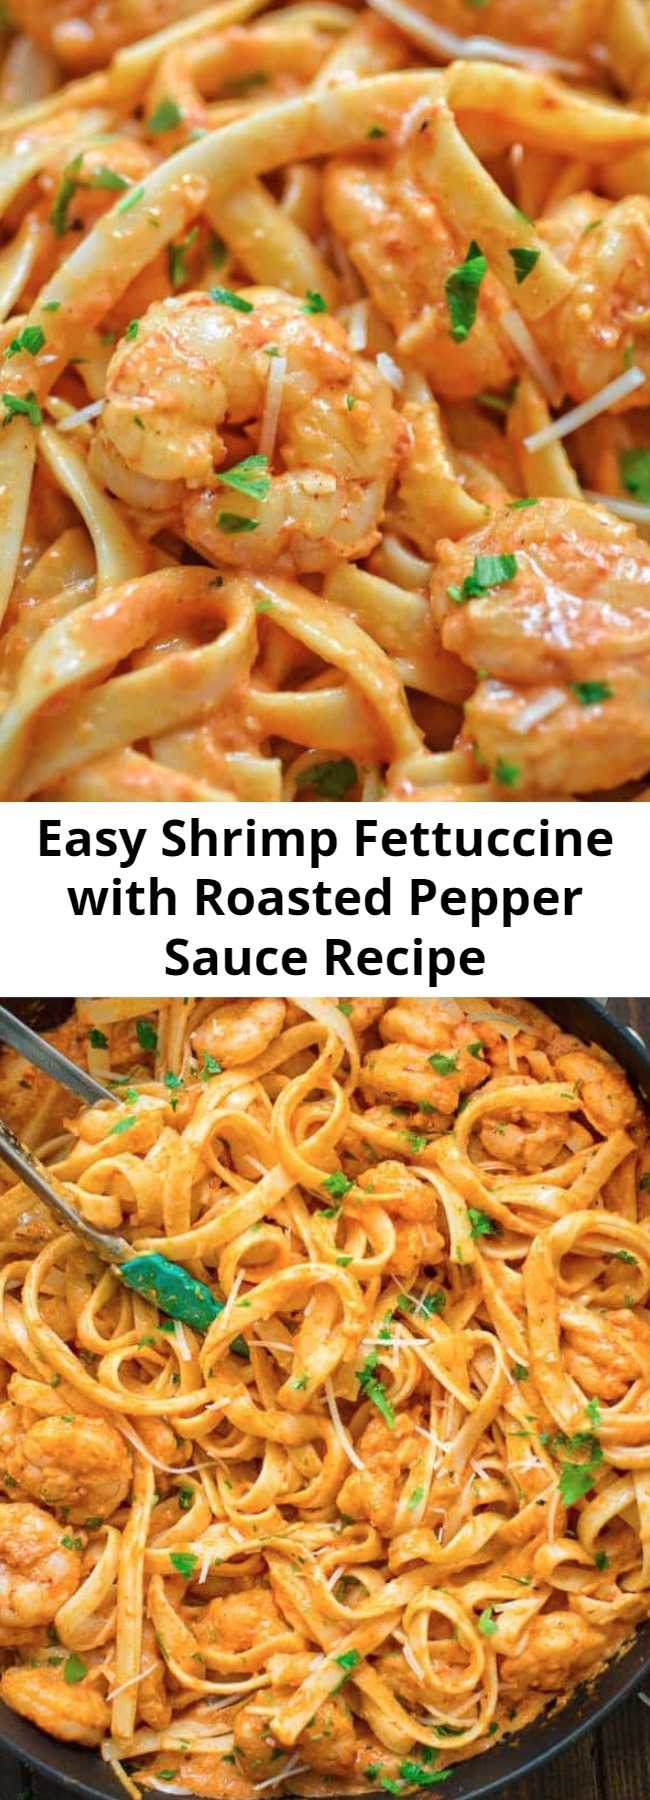 Easy Shrimp Fettuccine with Roasted Pepper Sauce Recipe - Rich and creamy, hearty and so flavorful, this Shrimp Fettuccine with Roasted Pepper Sauce tastes better than a restaurant-cooked meal. Made in under 30 minutes! #pasta #shrimp #dinner #seafood #easydinner #recipeoftheday